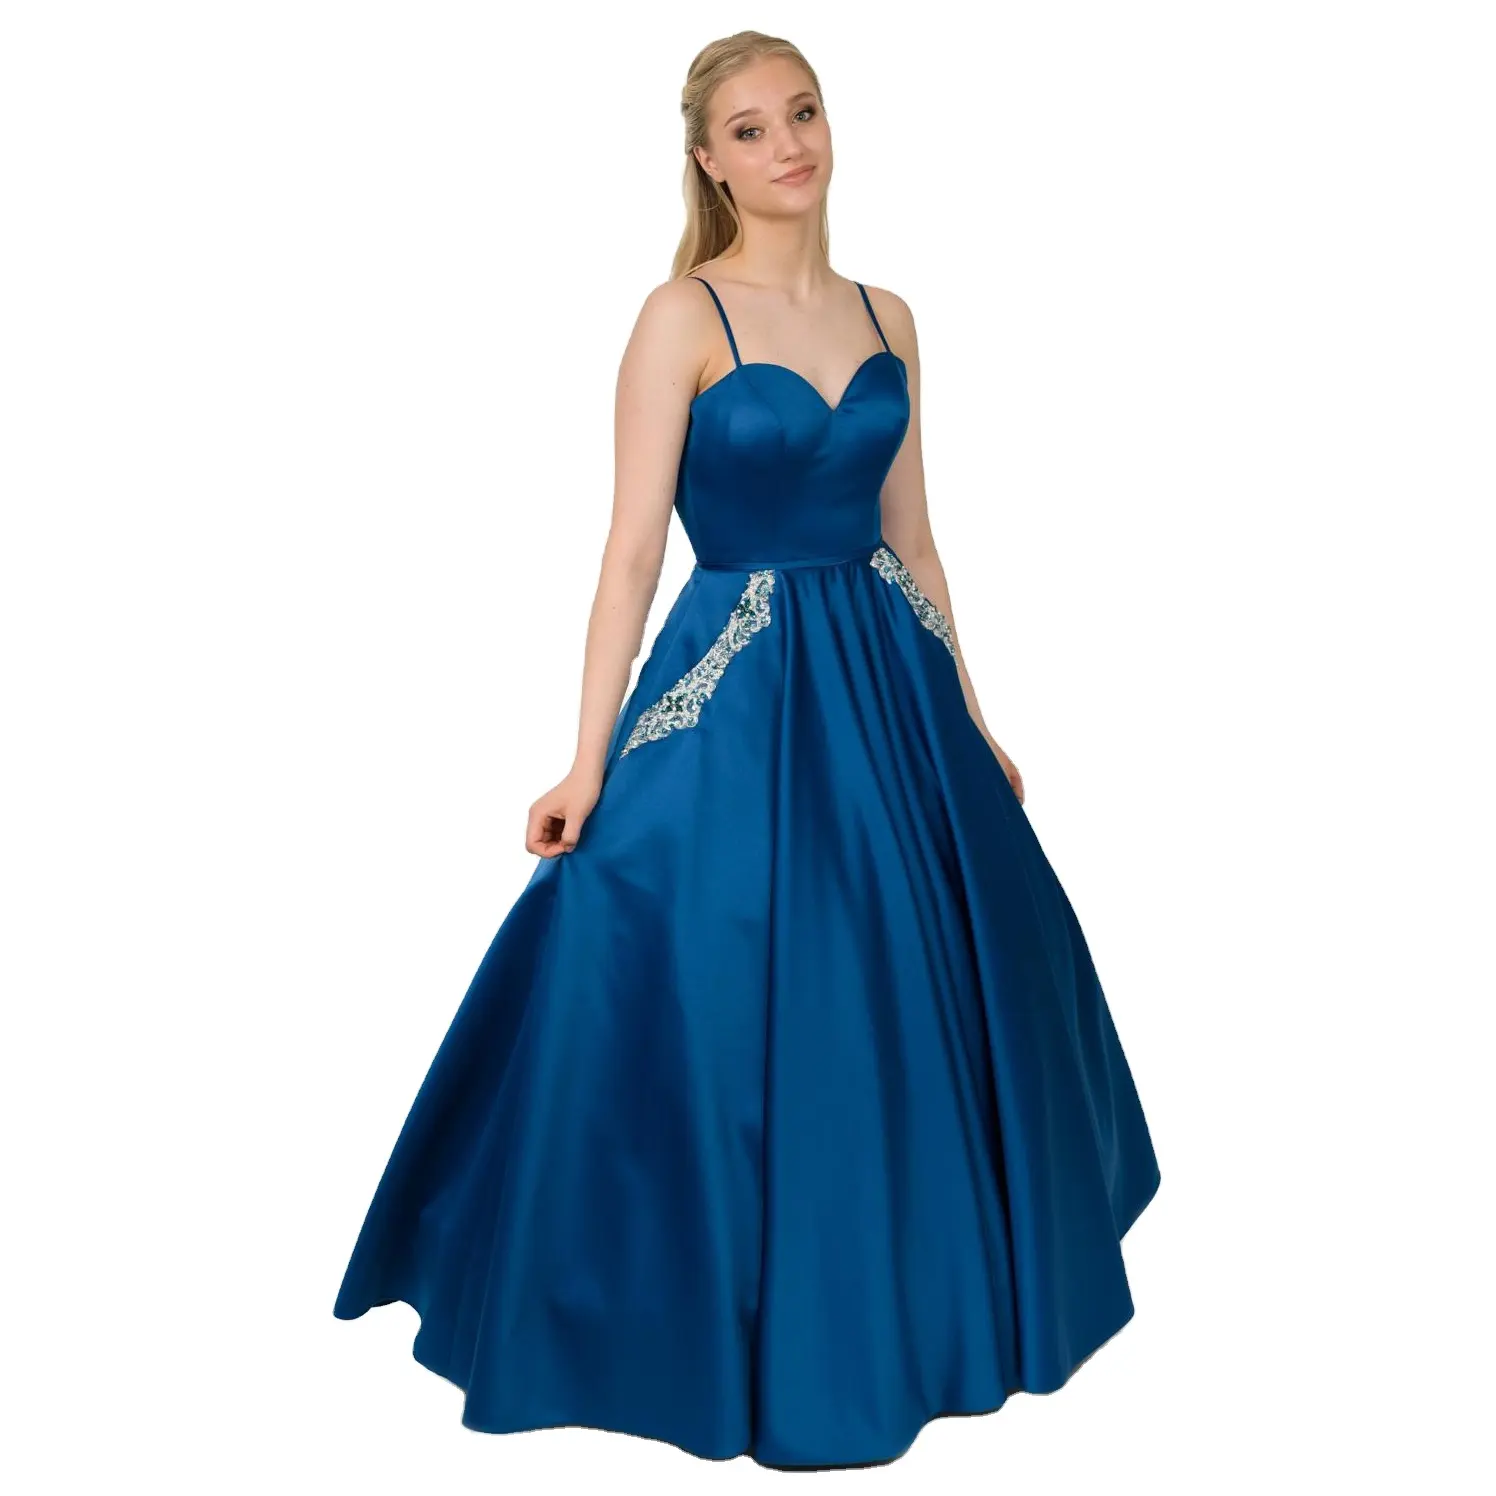 Long Life High Quality High-End Luxury And Beauty Prom Dresses Turkey Istanbul Prom Dress